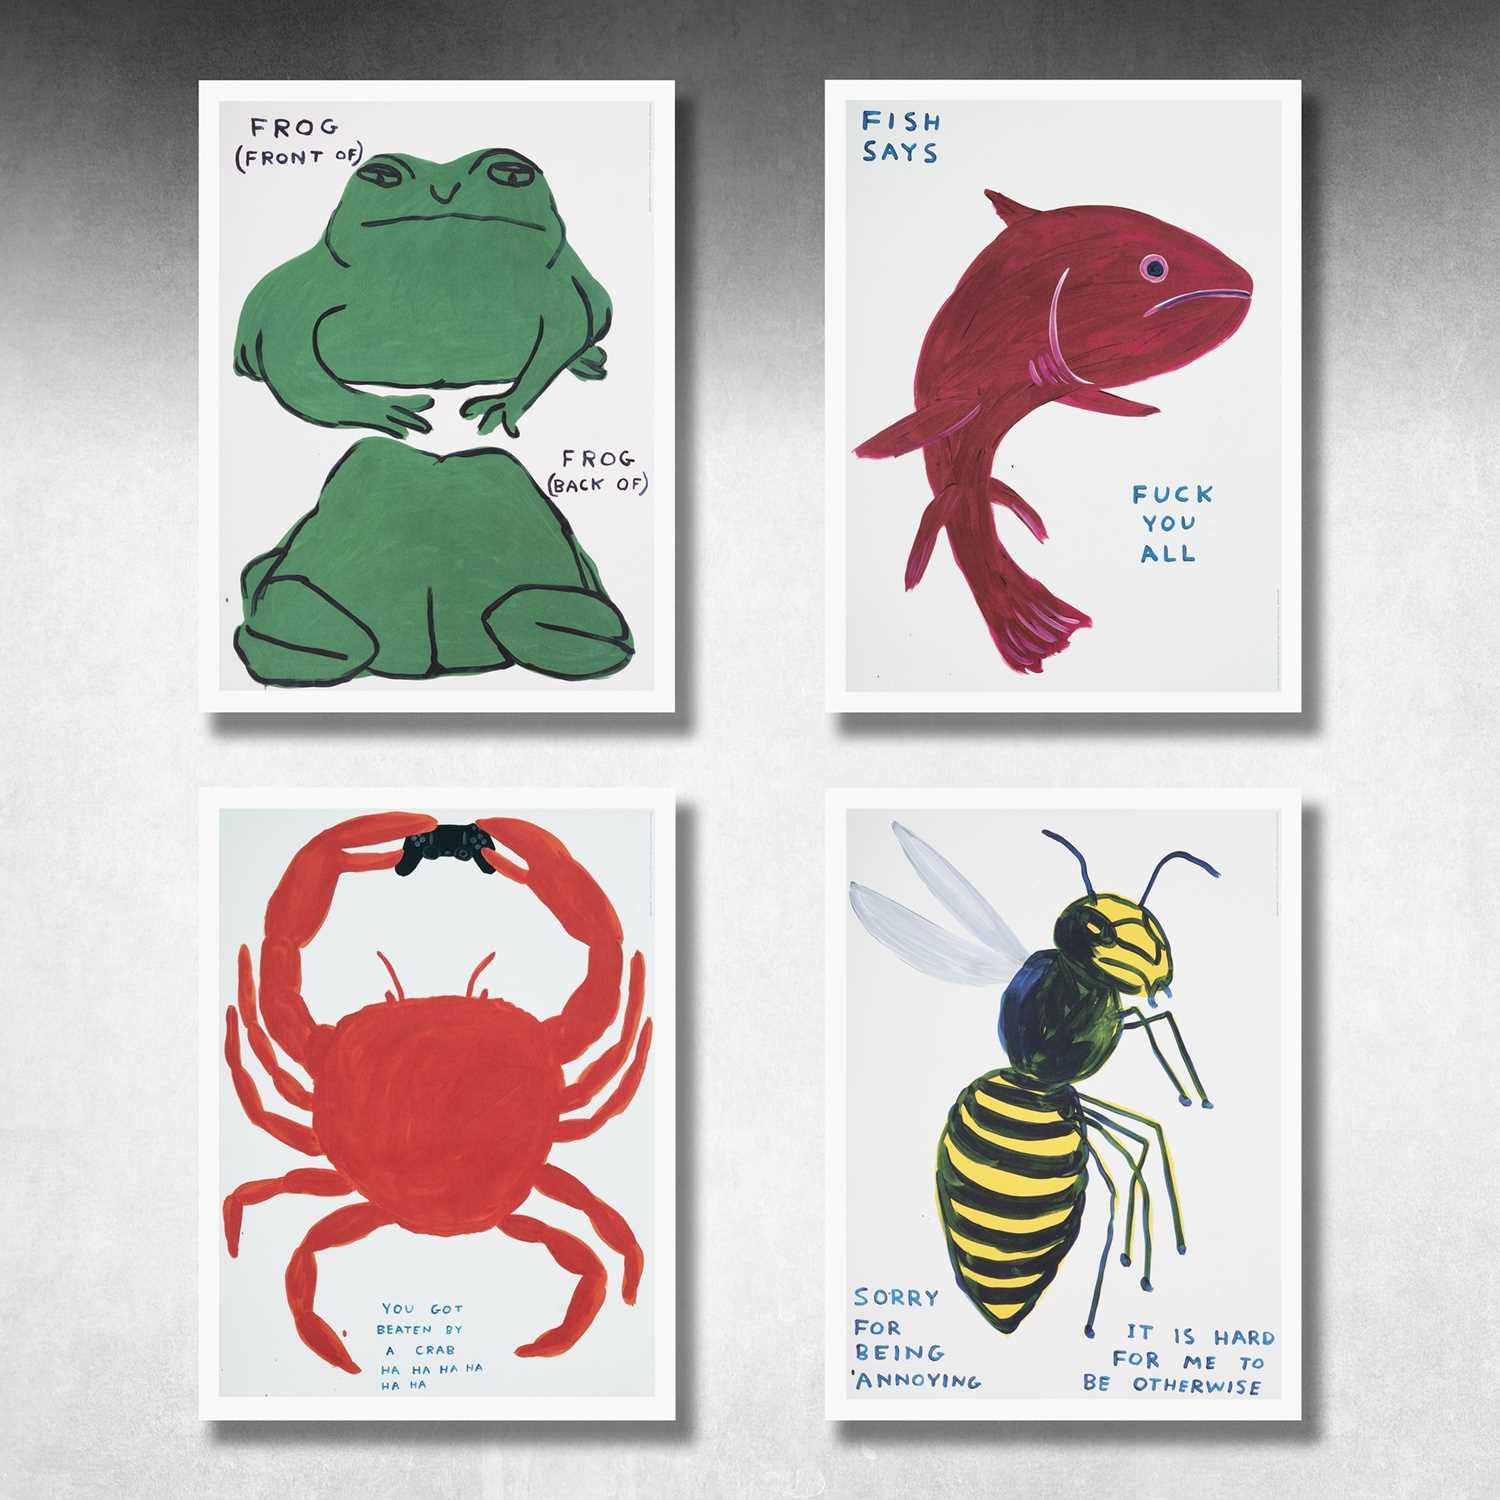 Lot 51 - David Shrigley (British 1968-), 'Fish Says Fuck You All, Frog (Front Of) Frog (Back Of), Sorry For Being Annoying & You Got Beaten By A Crab', 2022